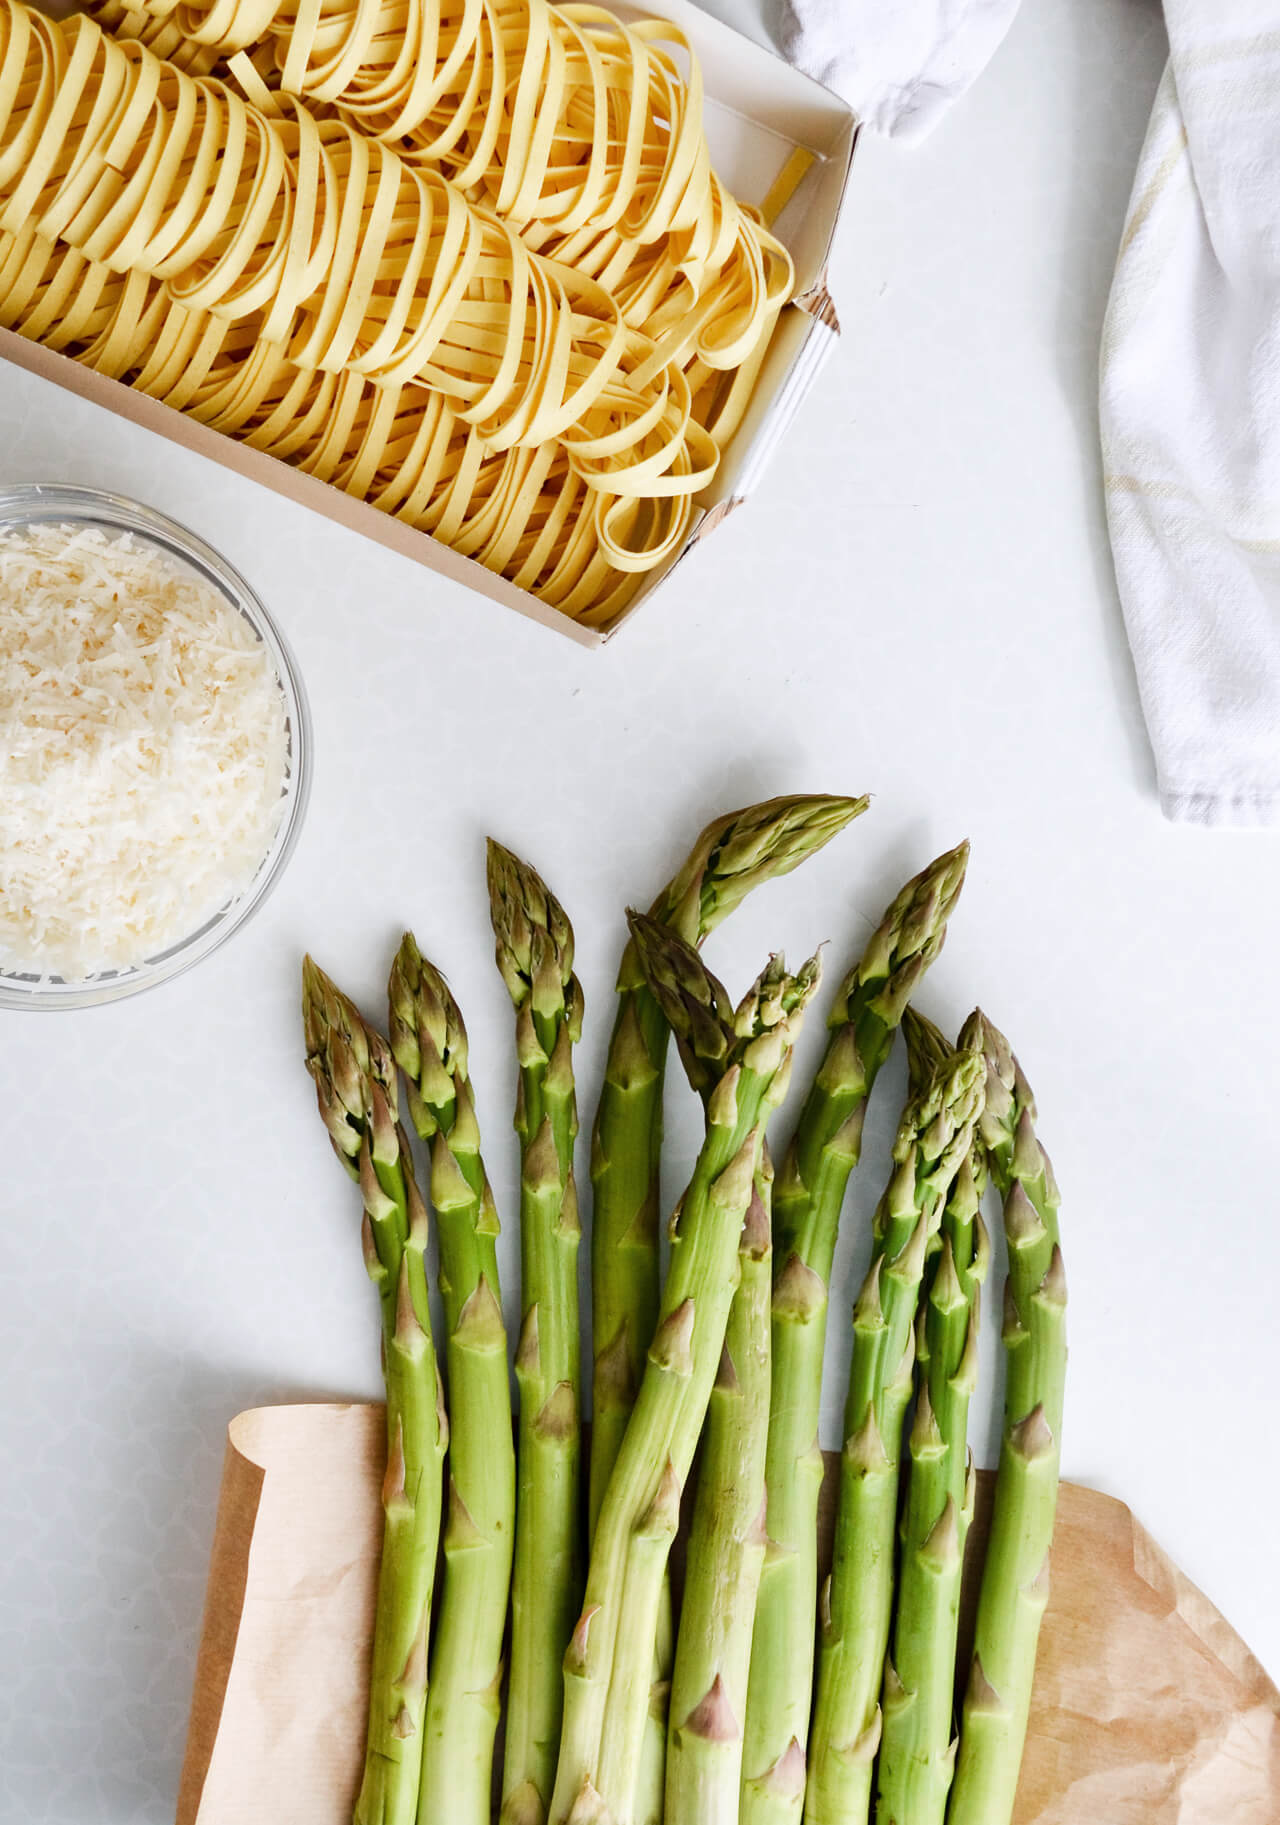 Creamy asparagus tagliatelle with poached eggs - a quick and wonderful asparagus dinner.